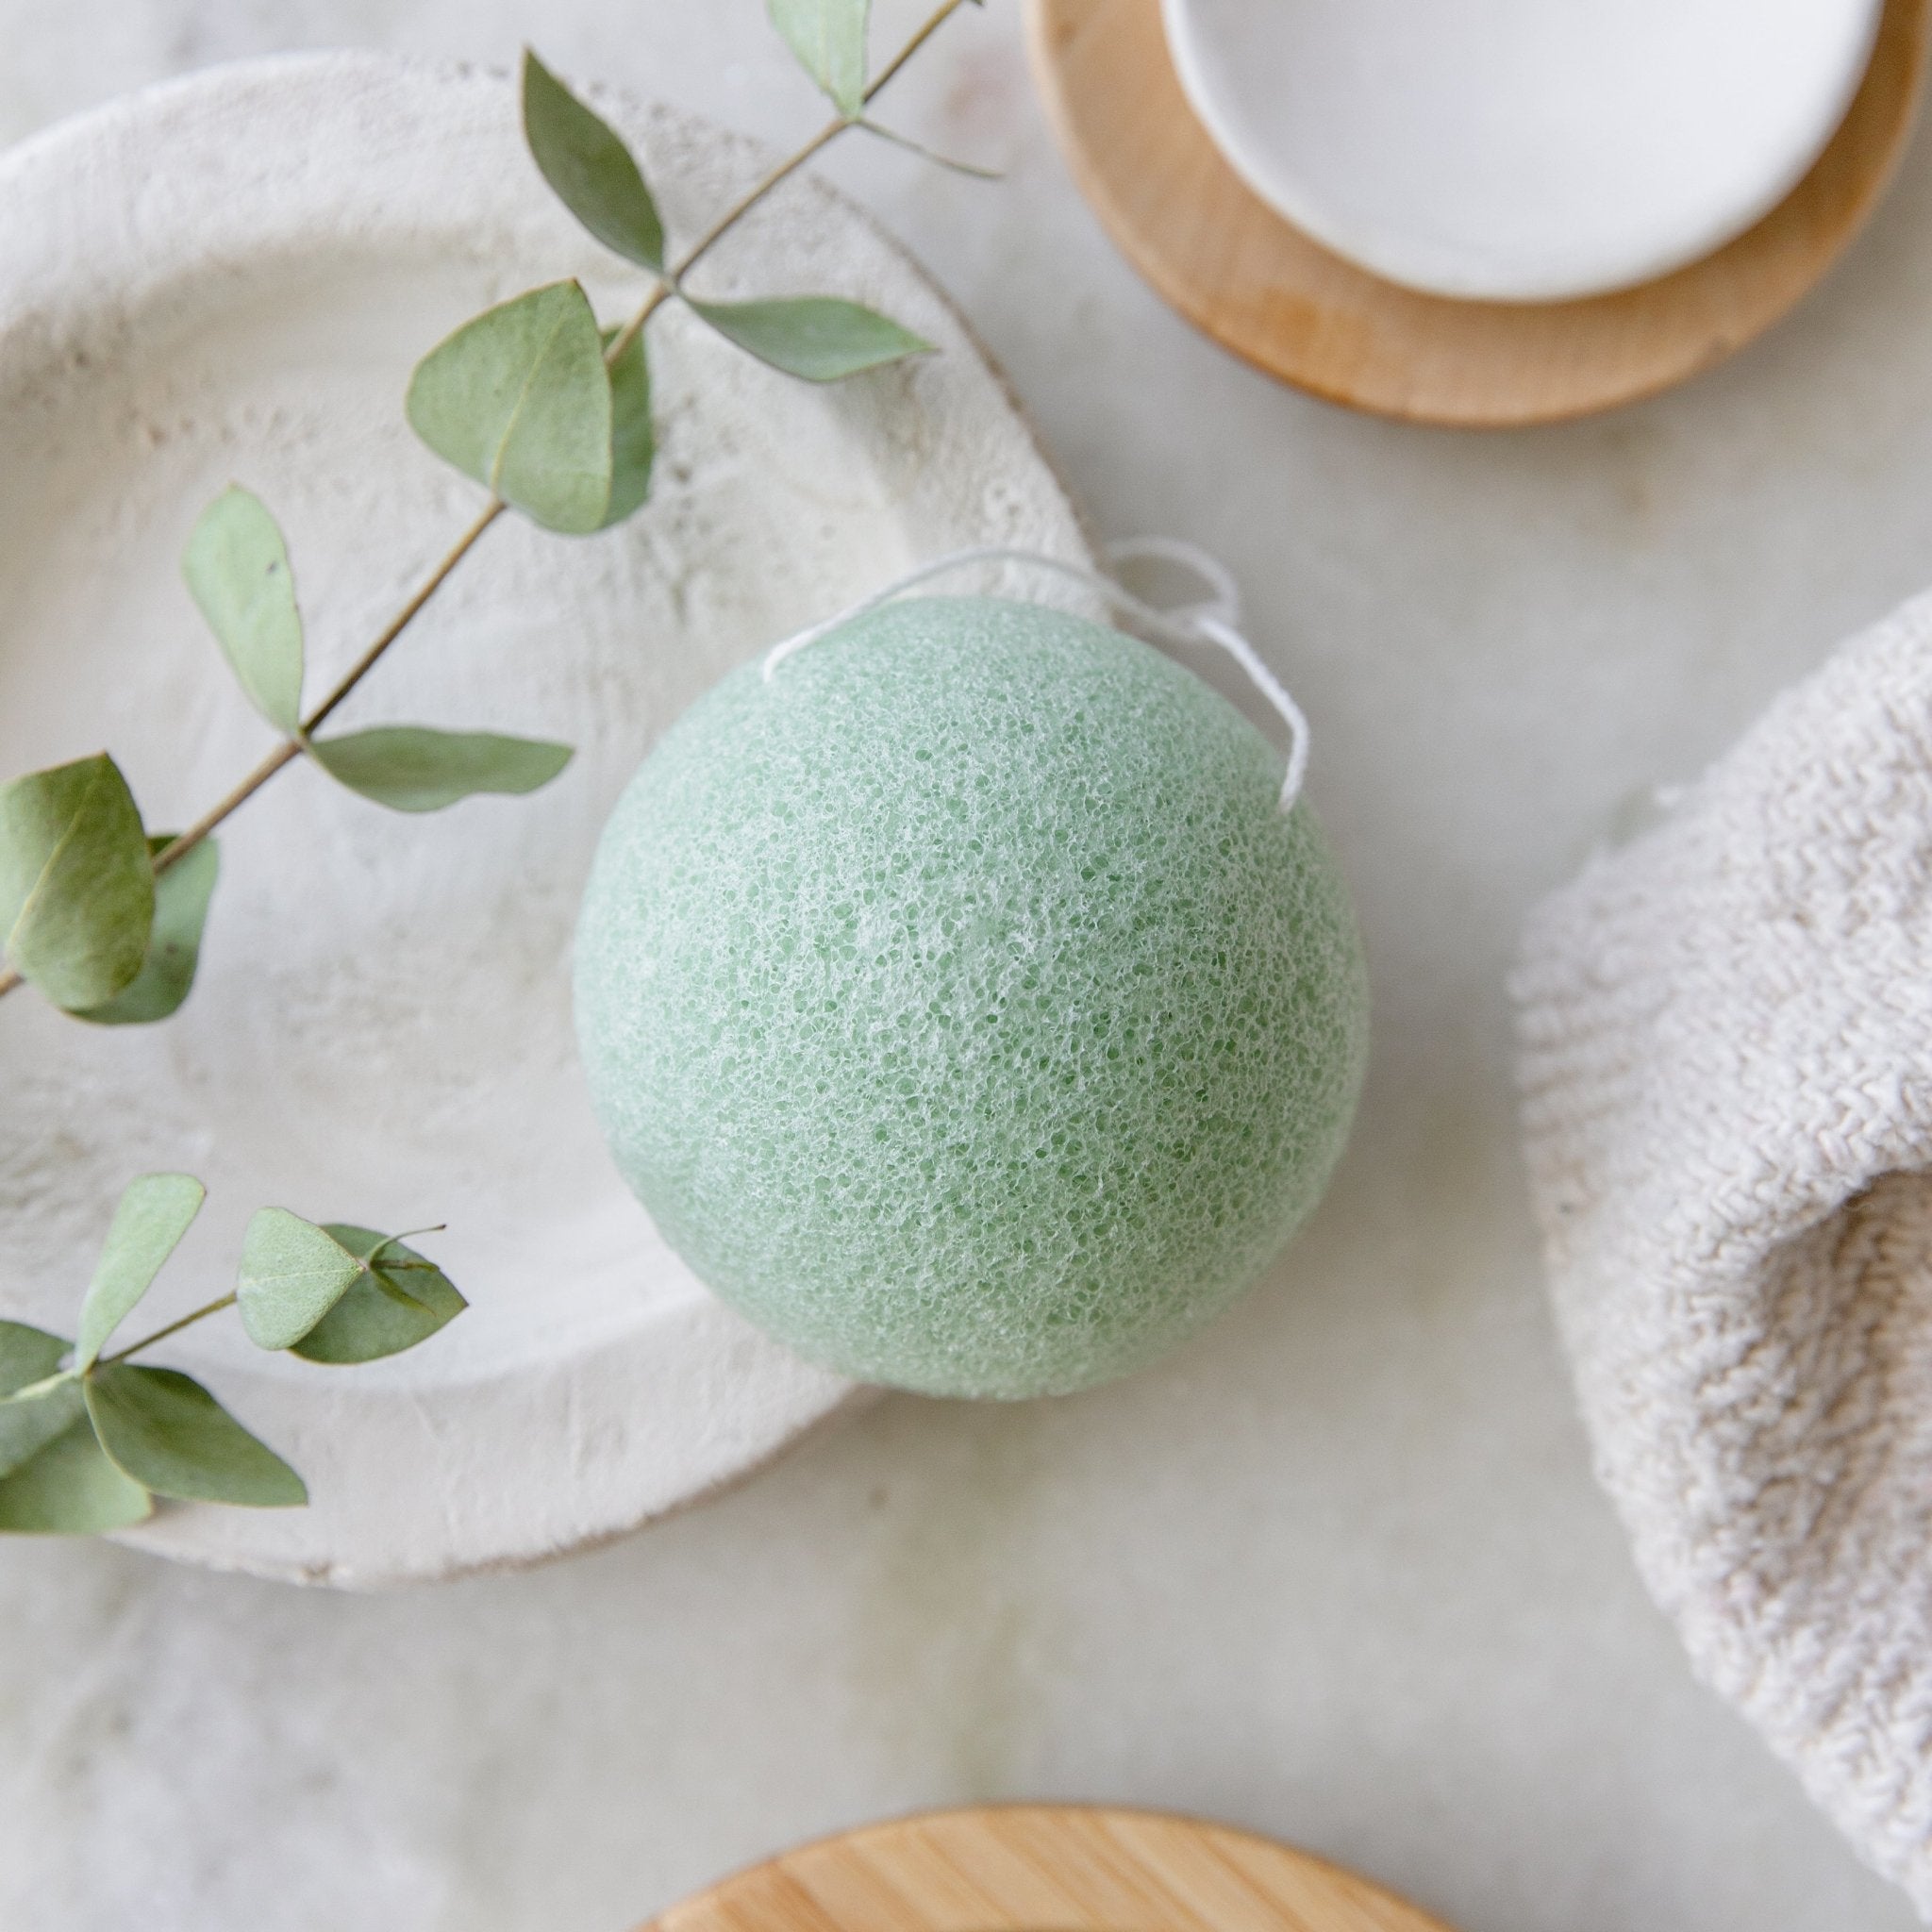 Gift Set: 3 Konjac Facial Cleansing Sponges In Cotton Pouch